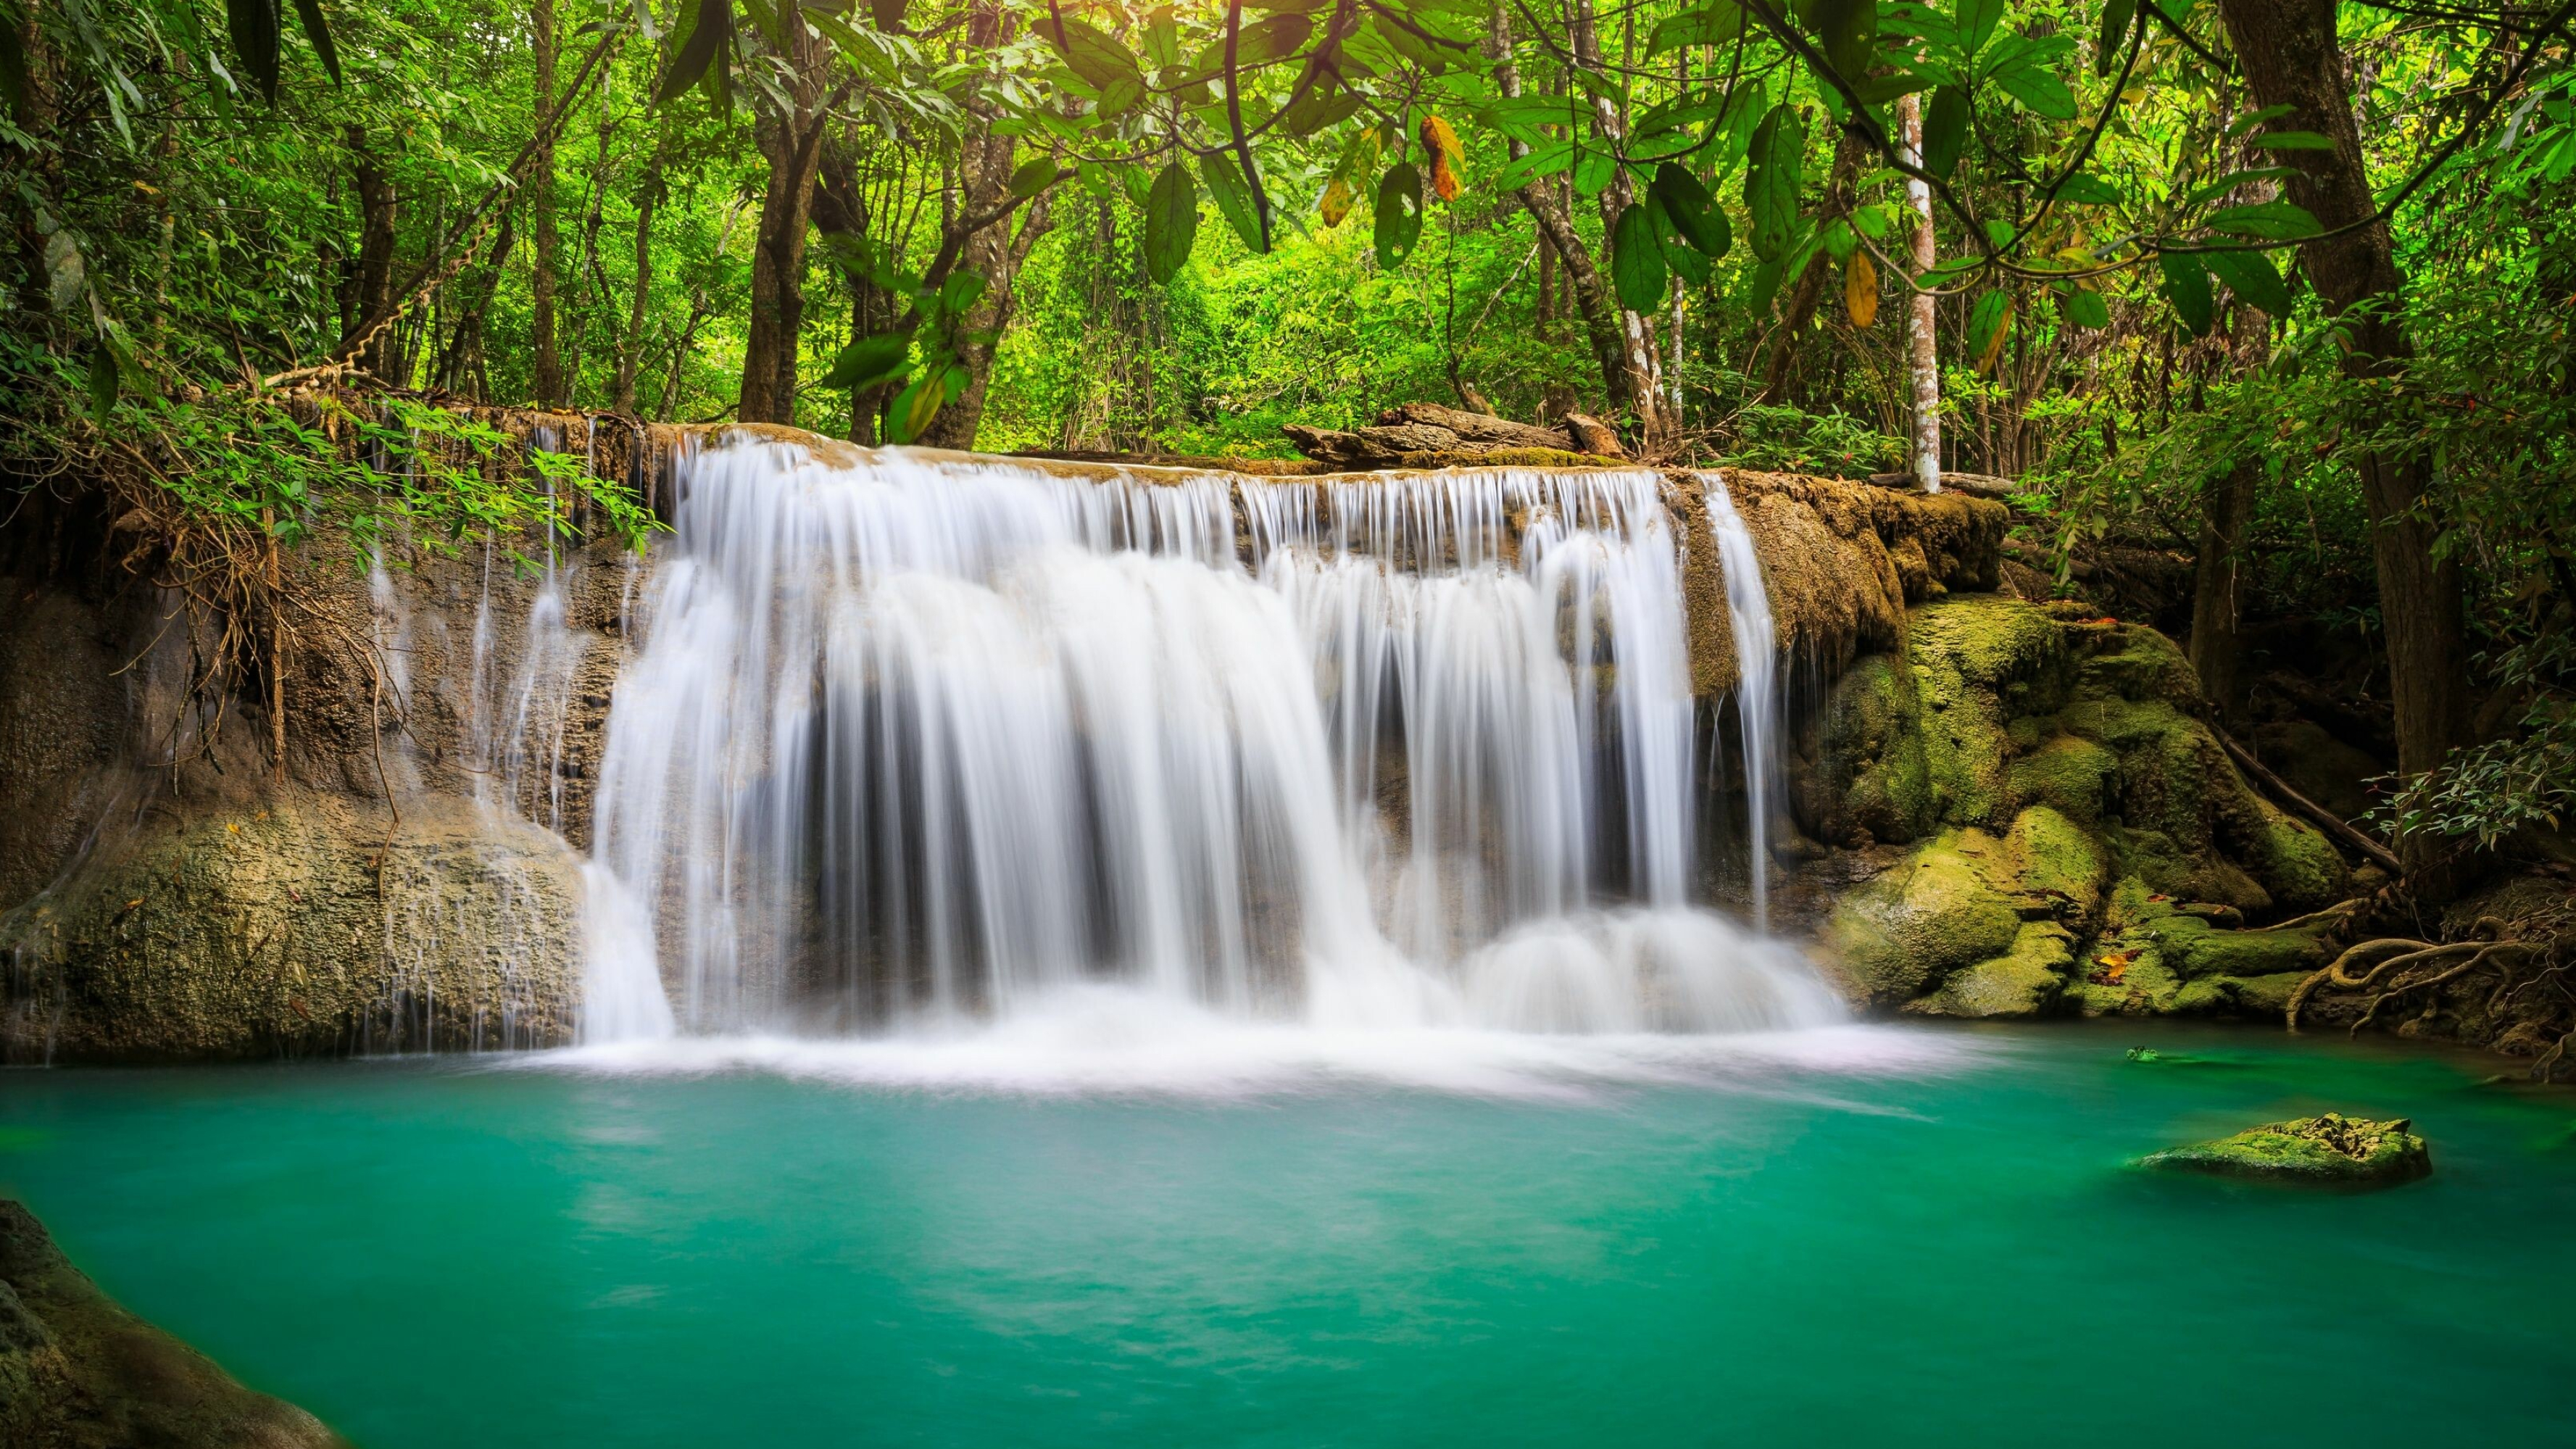 Waterfall: Rainforest, Water that descends from a wide stream or river. 3560x2000 HD Wallpaper.